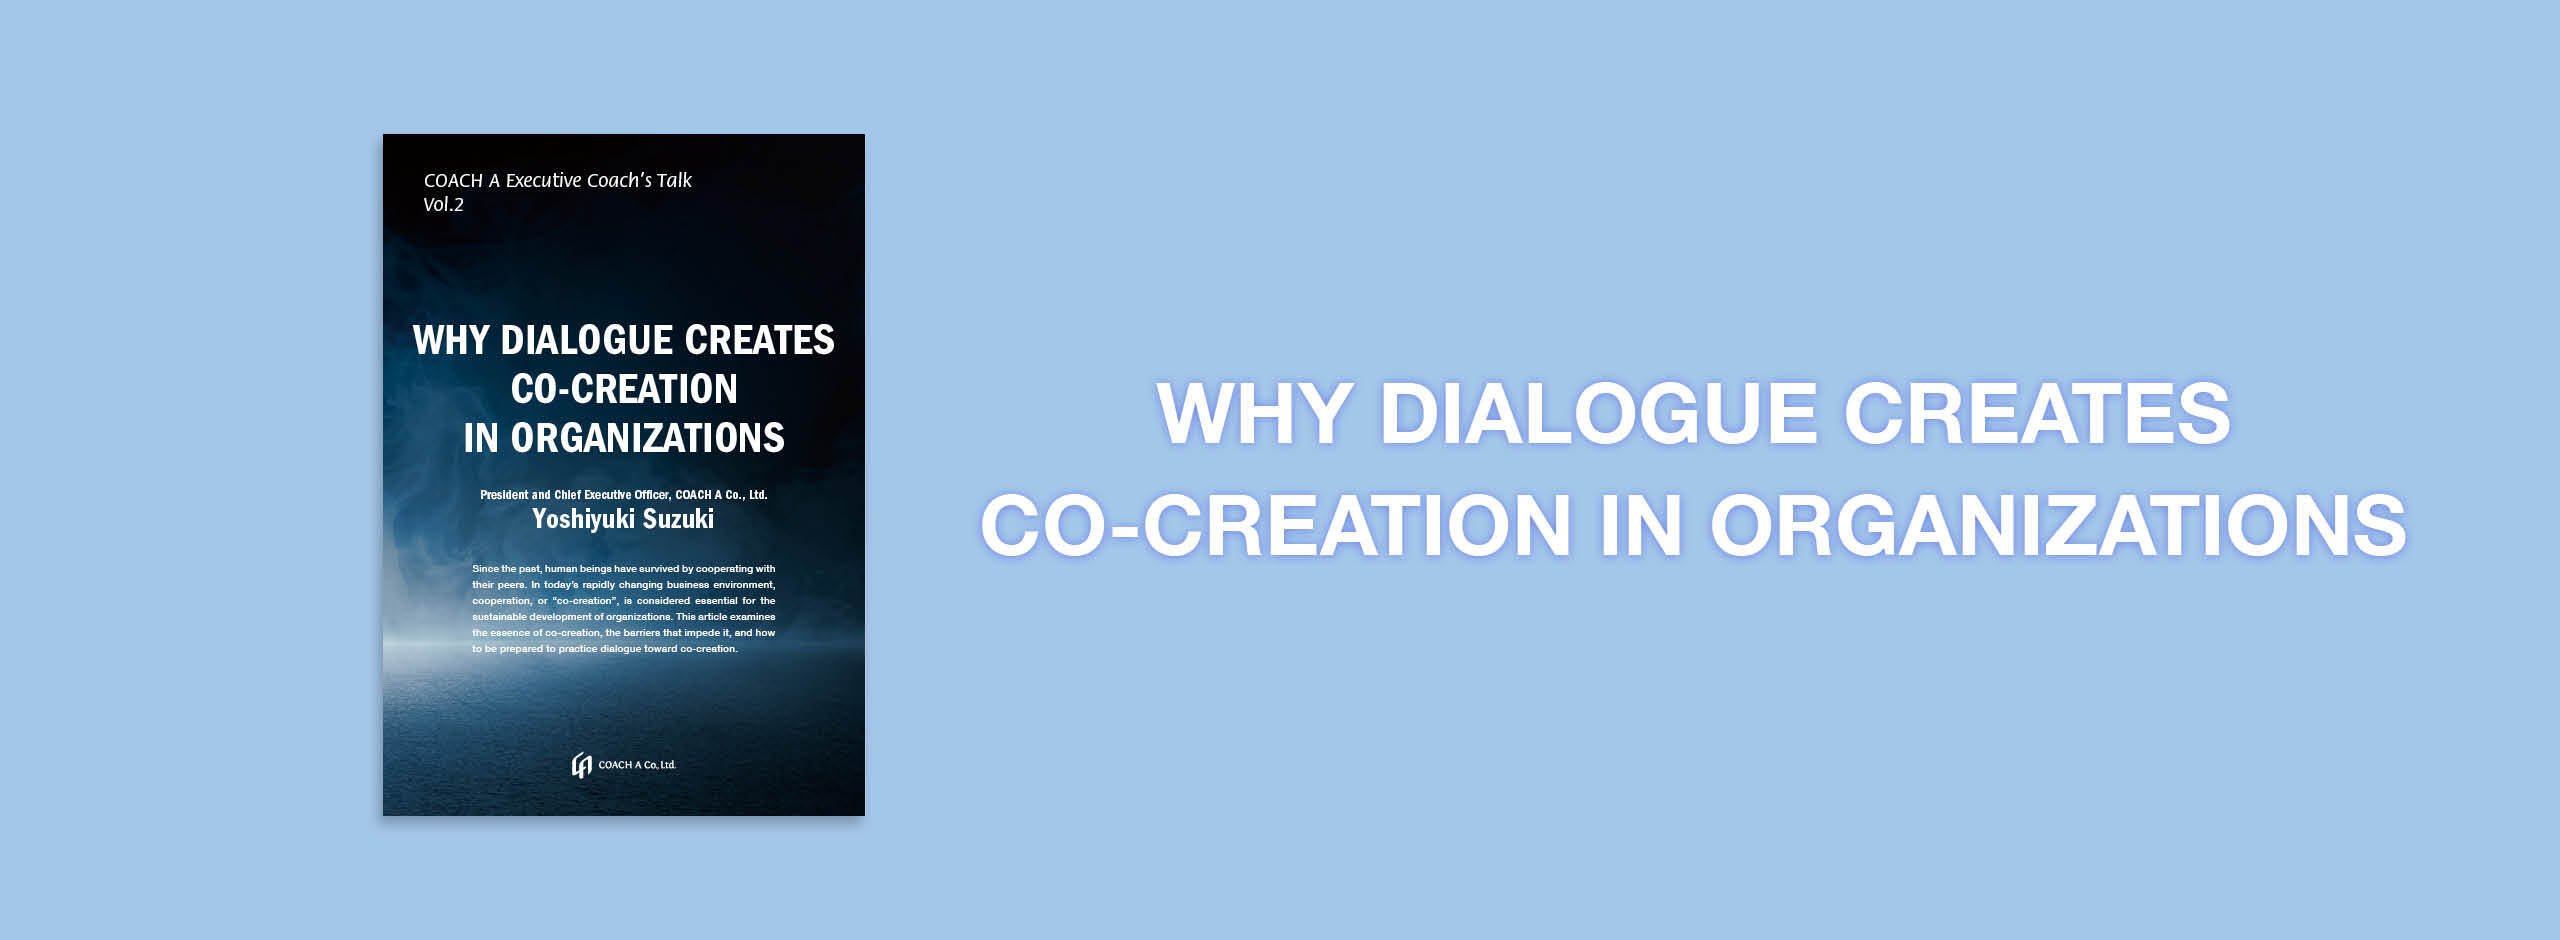 WHY DIALOGUE CREATES CO-CREATION IN ORGANIZATIONS